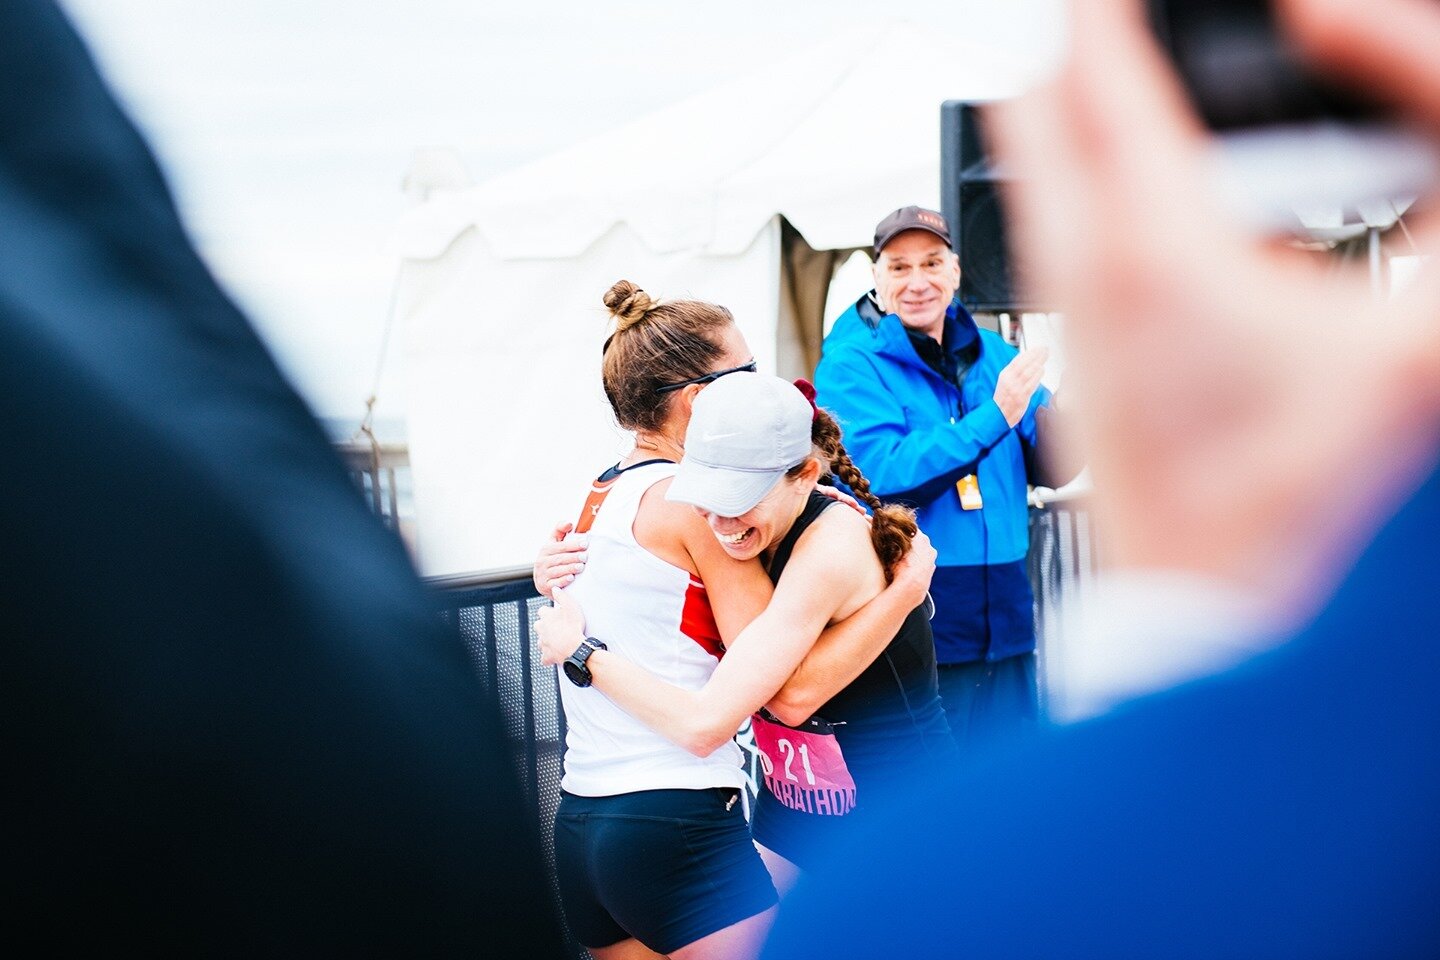 Finish line hugs are the best hugs. Let's cross it together this Fall. Click the link in our bio to secure your spot in October.